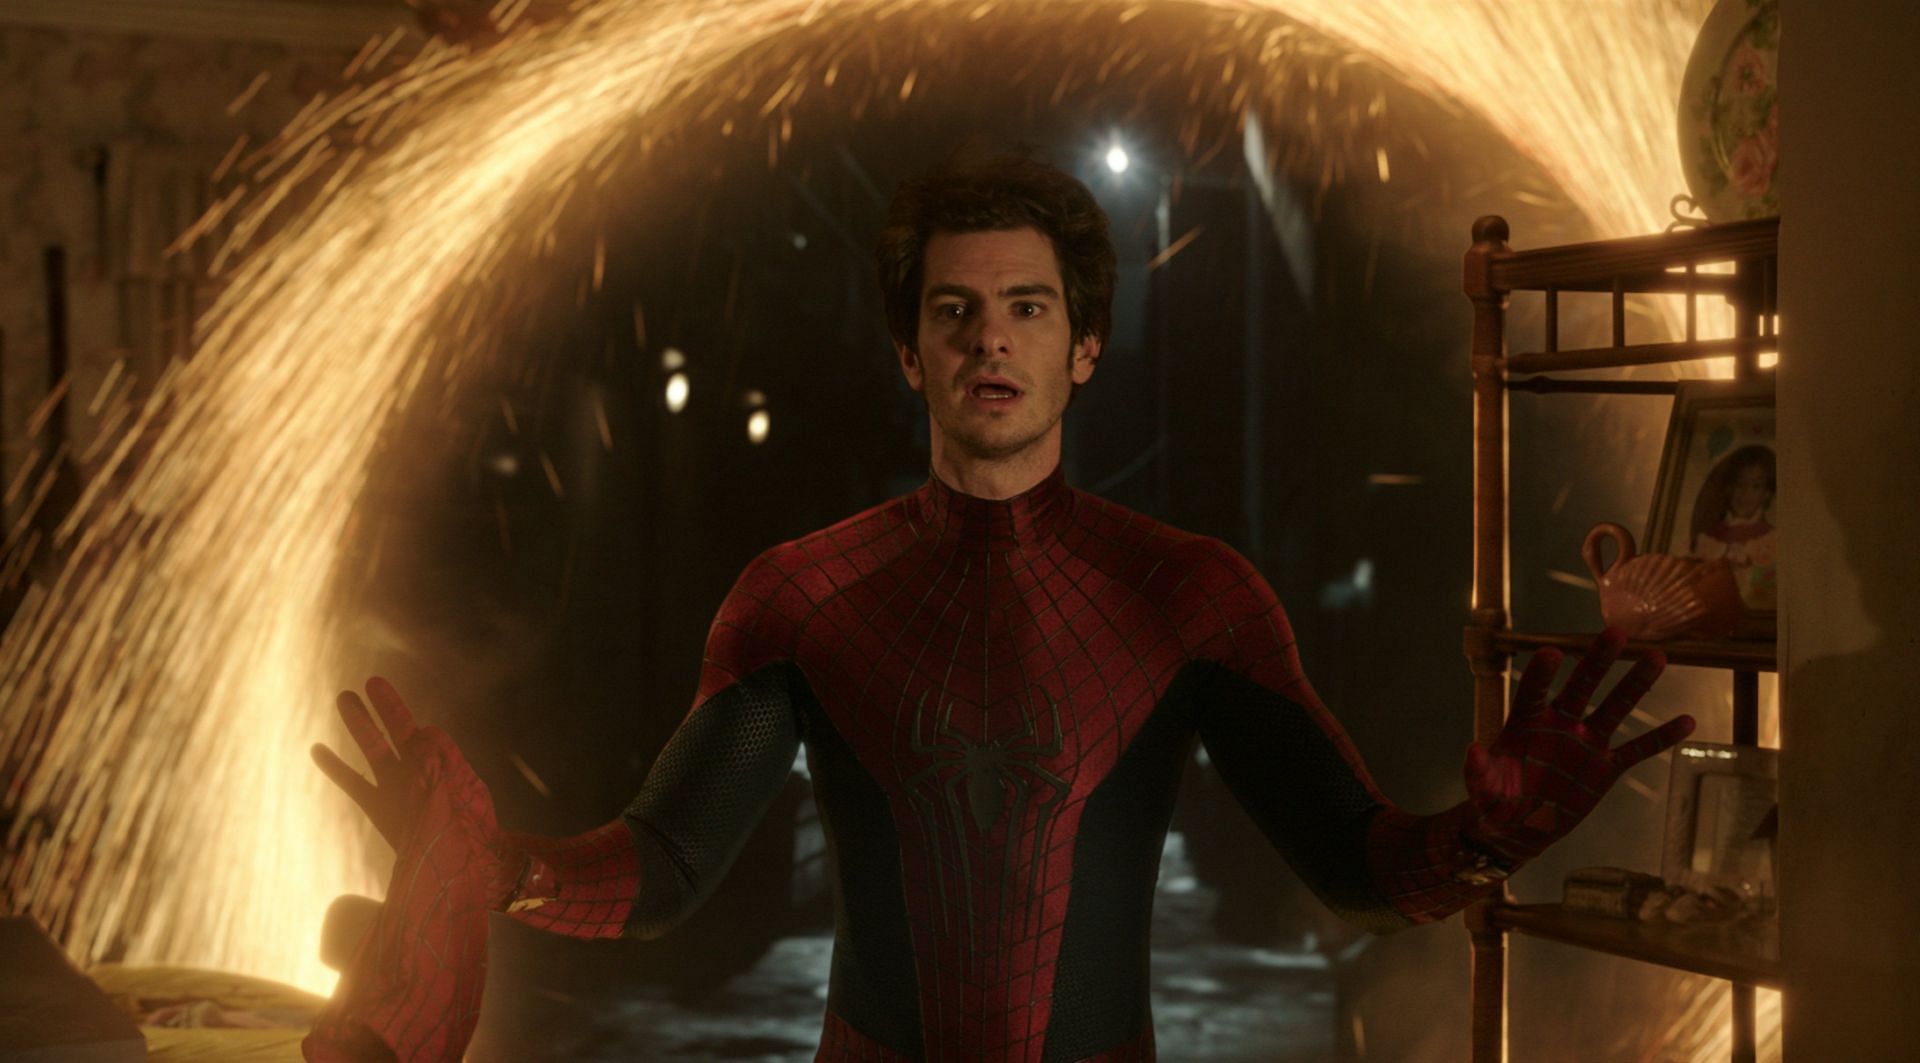 Unmasking the Underrated: Discovering the brilliance of Andrew Garfield